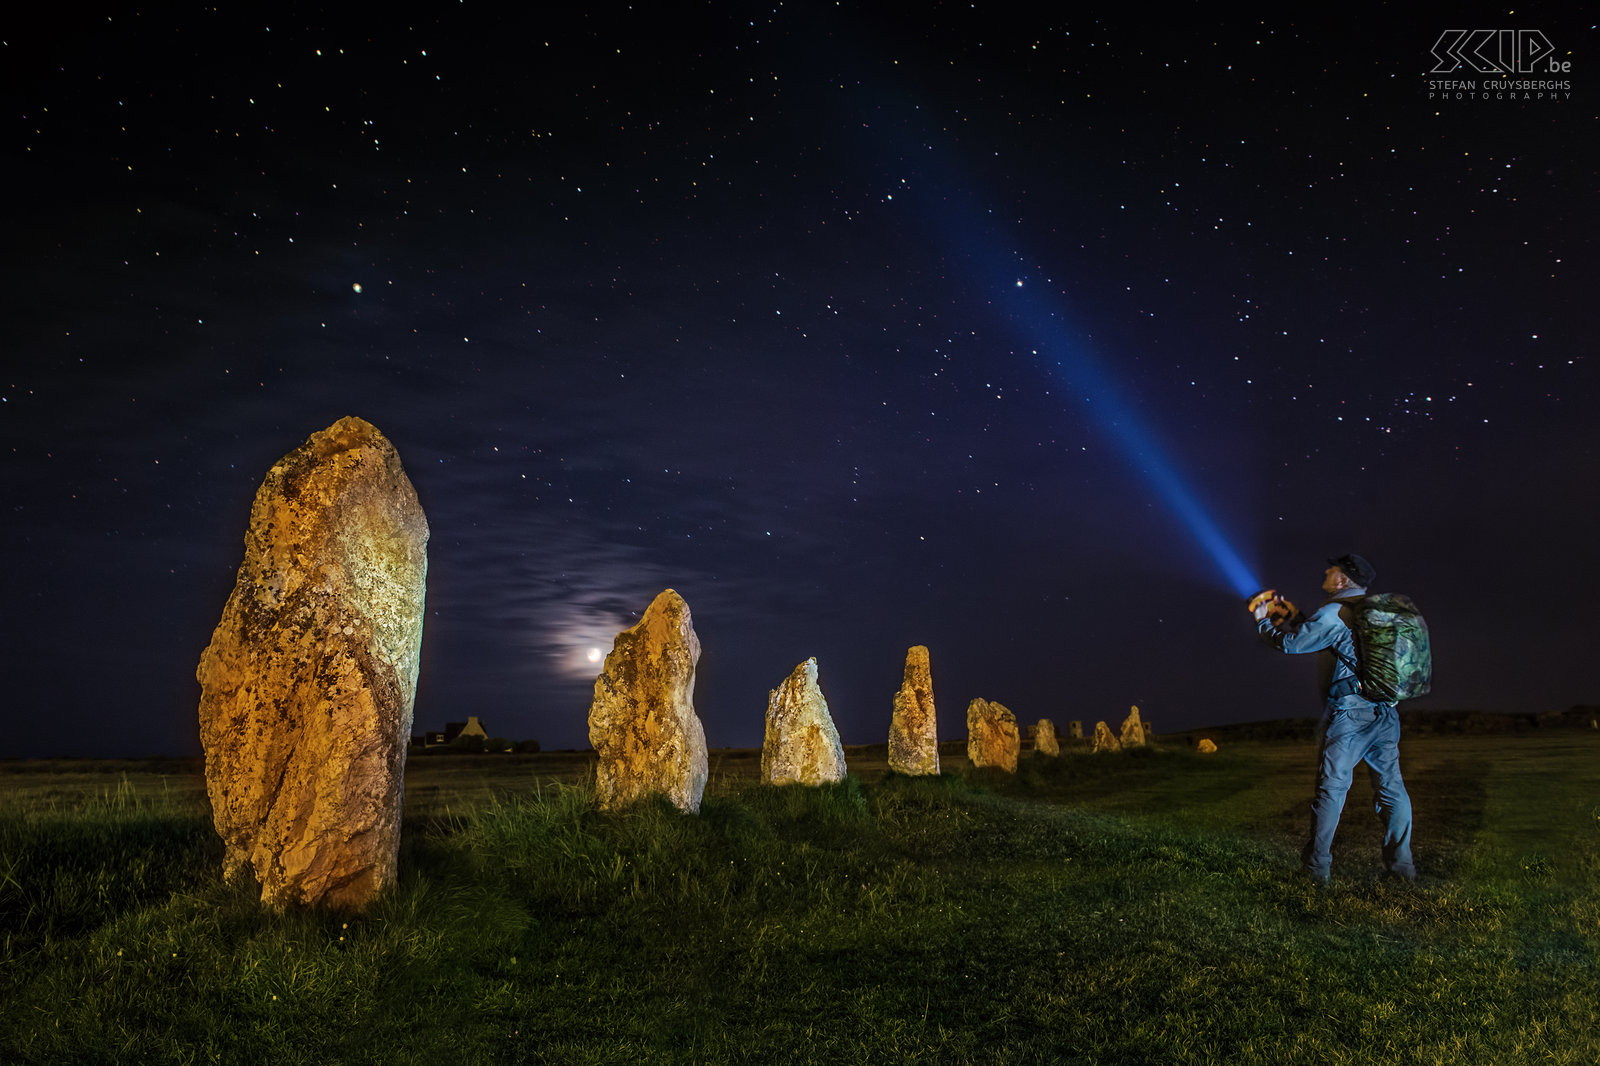 Crozon - Menhirs Lagatjar - Stefan The prehistoric menhirs from Lagatjar are an intriguing arrangement of hundreds of large prehistoric white quartz stones in an open field near the ocean. I used light painting techniques to create some night shots of the megaliths and at the end I was experimenting by adding myself with my torchlight towards the sky. When opening the RAW file at home I noticed that my camera had recorded so many colorful stars. Stefan Cruysberghs